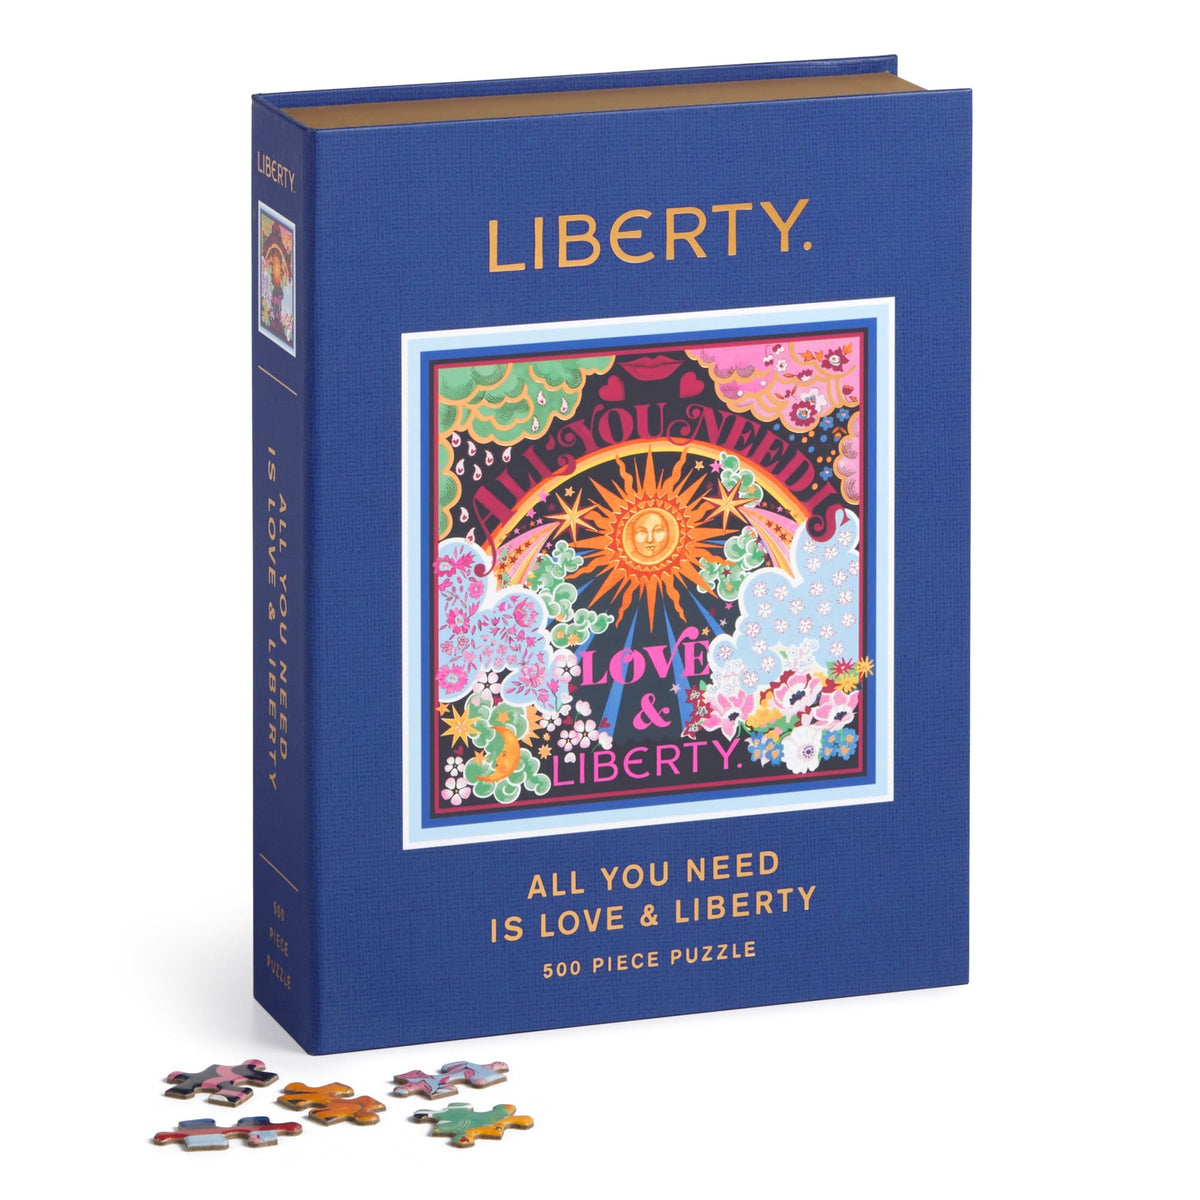 liberty-all-you-need-is-love-500-piece-book-puzzle-500-piece-puzzles-liberty-of-london-ltd-844039